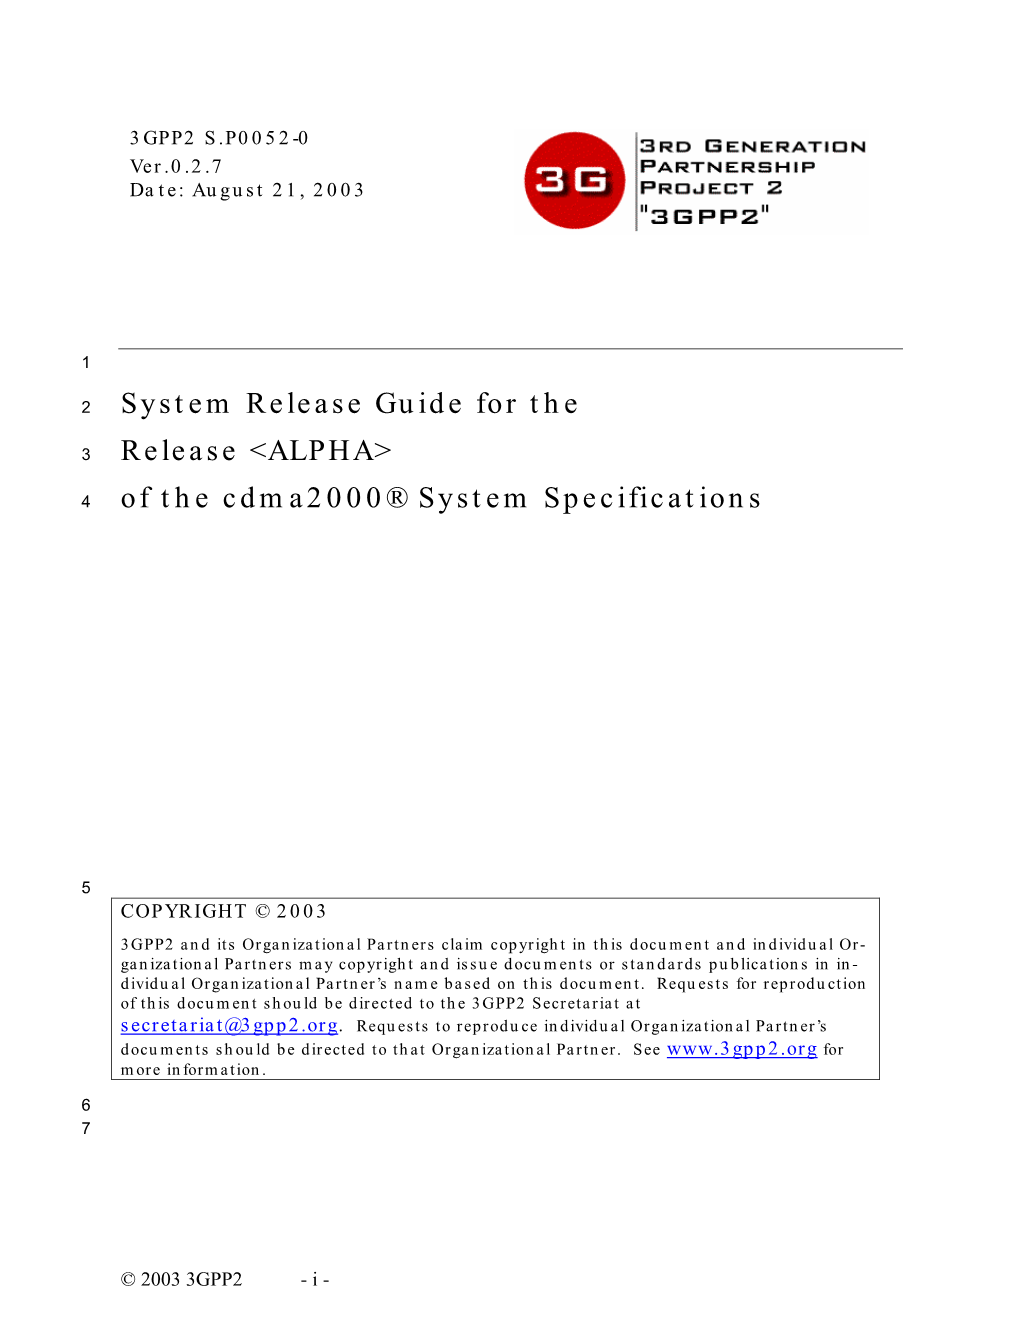 Of the Cdma2000® System Specifications